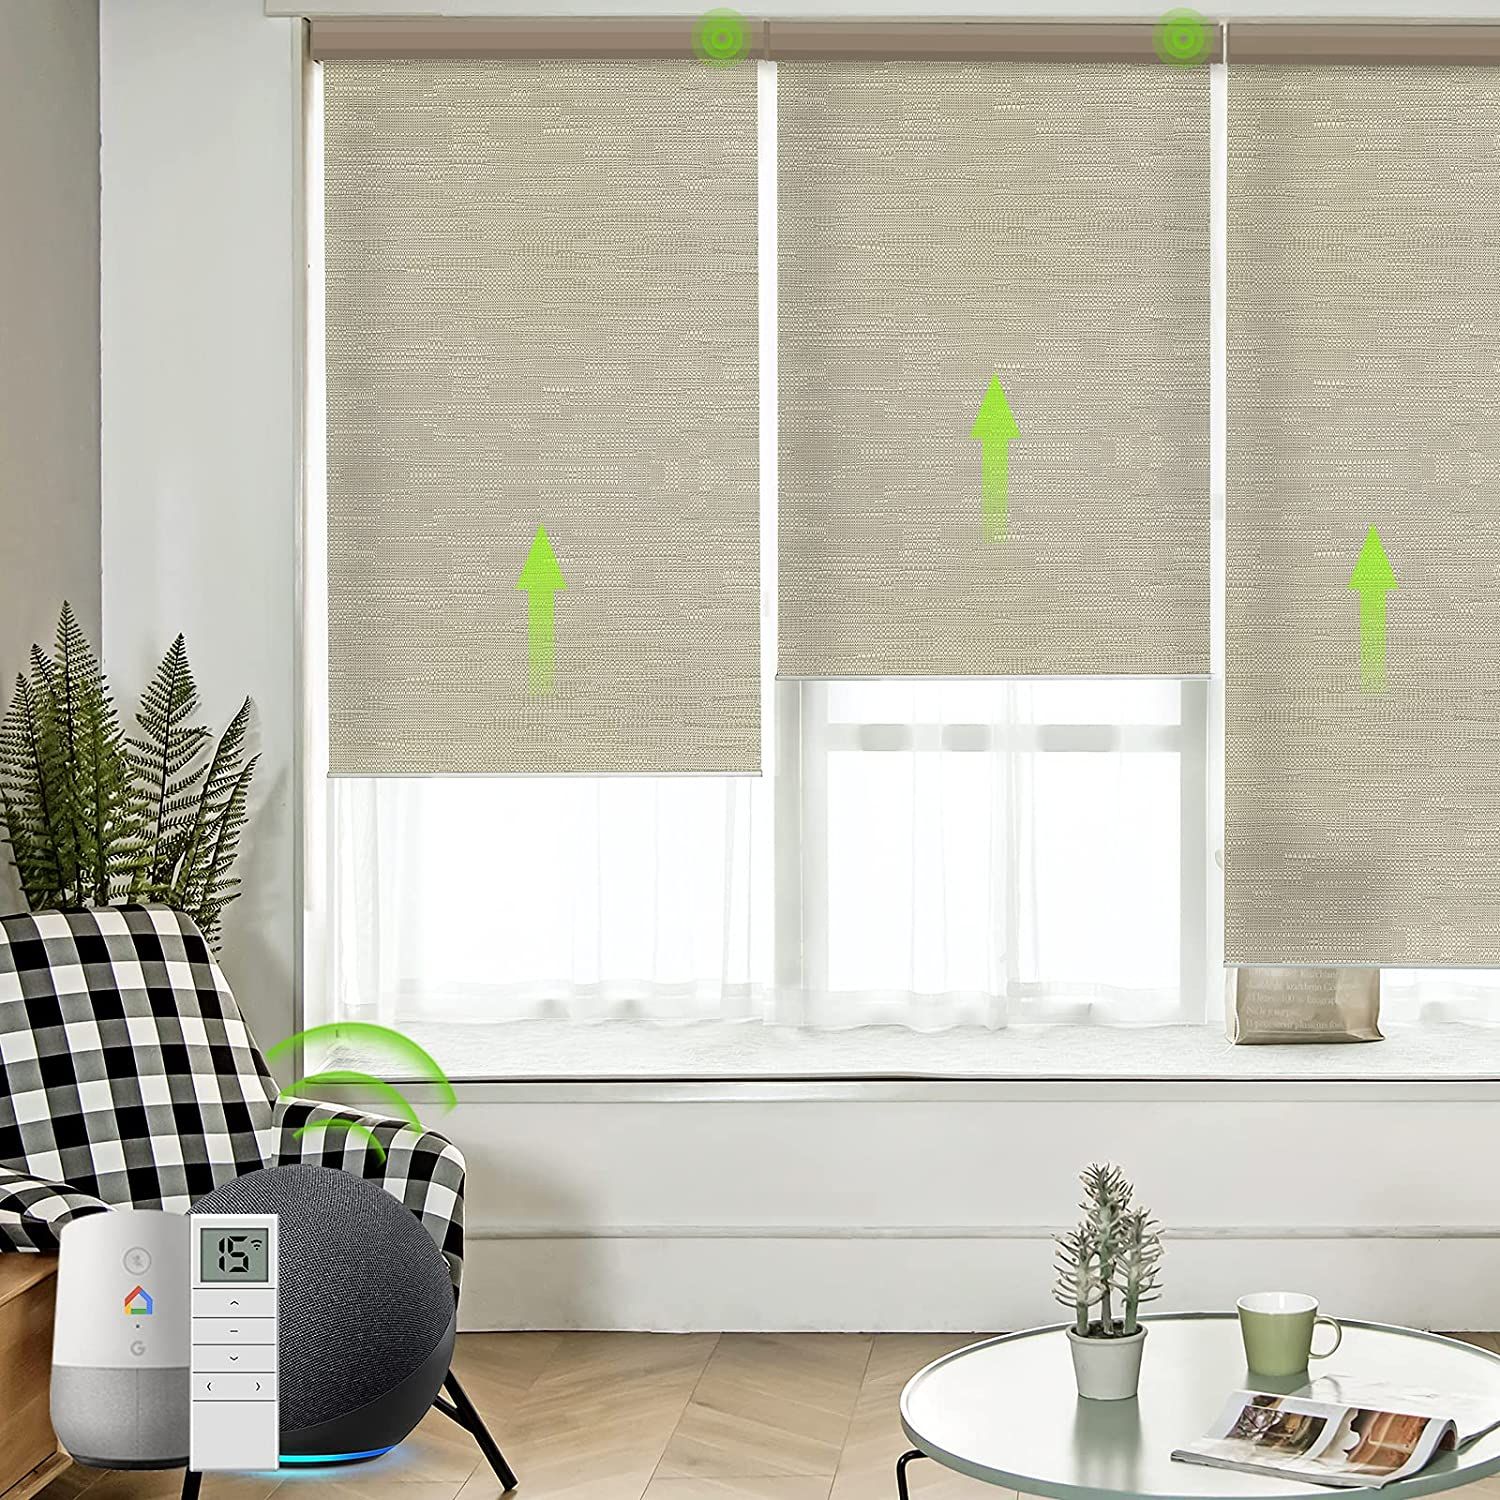 The 7 Best Smart Blinds for Your Home